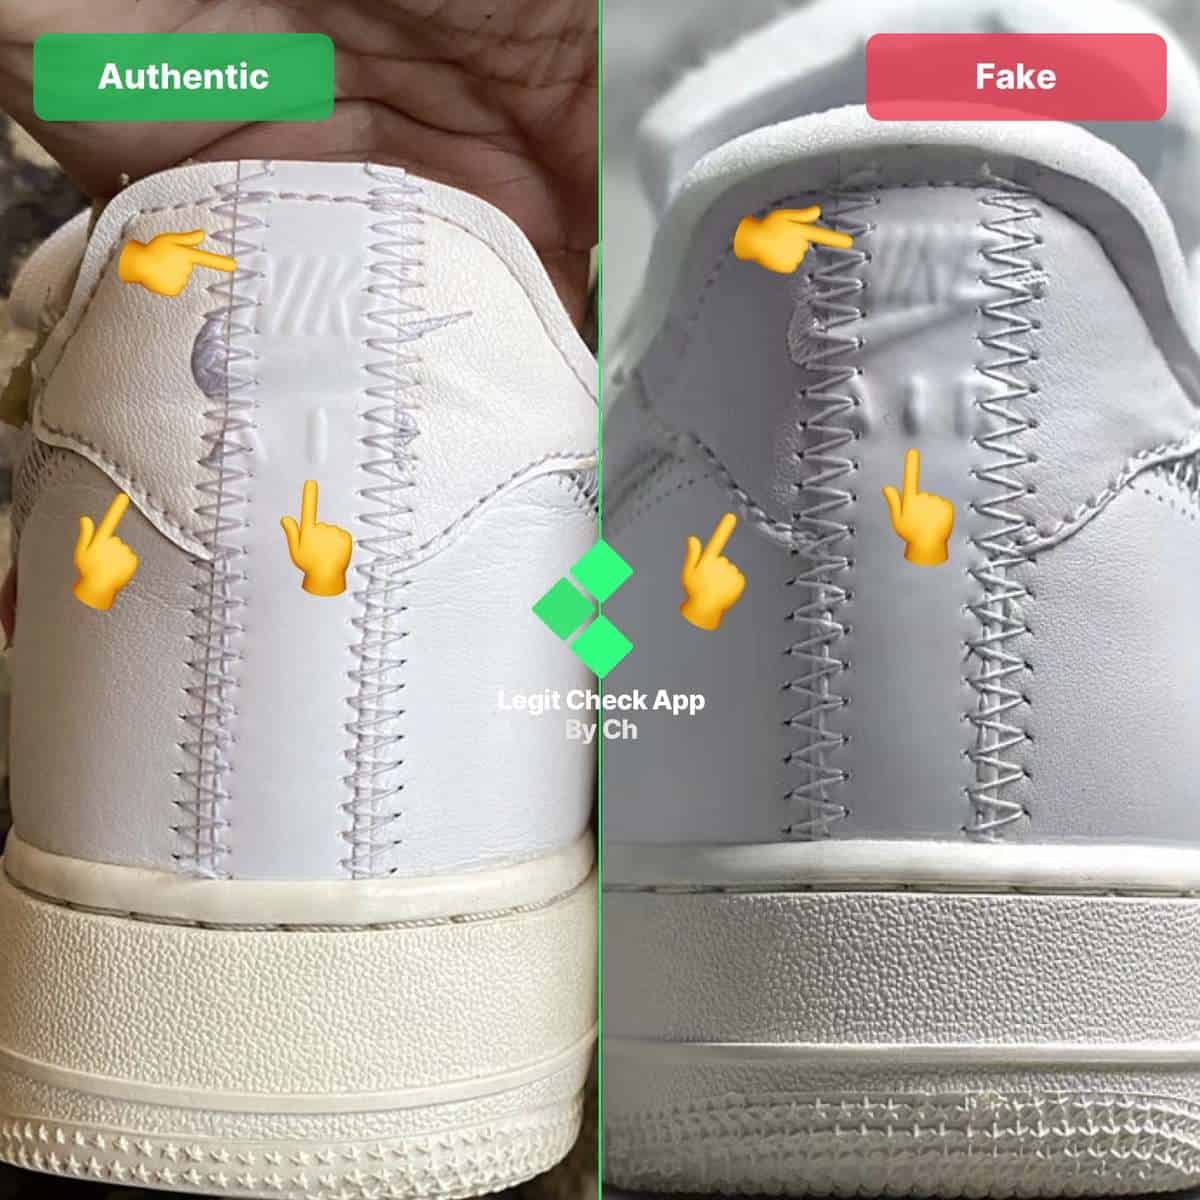 off white x nike air force 1 complexcon, Off 72%